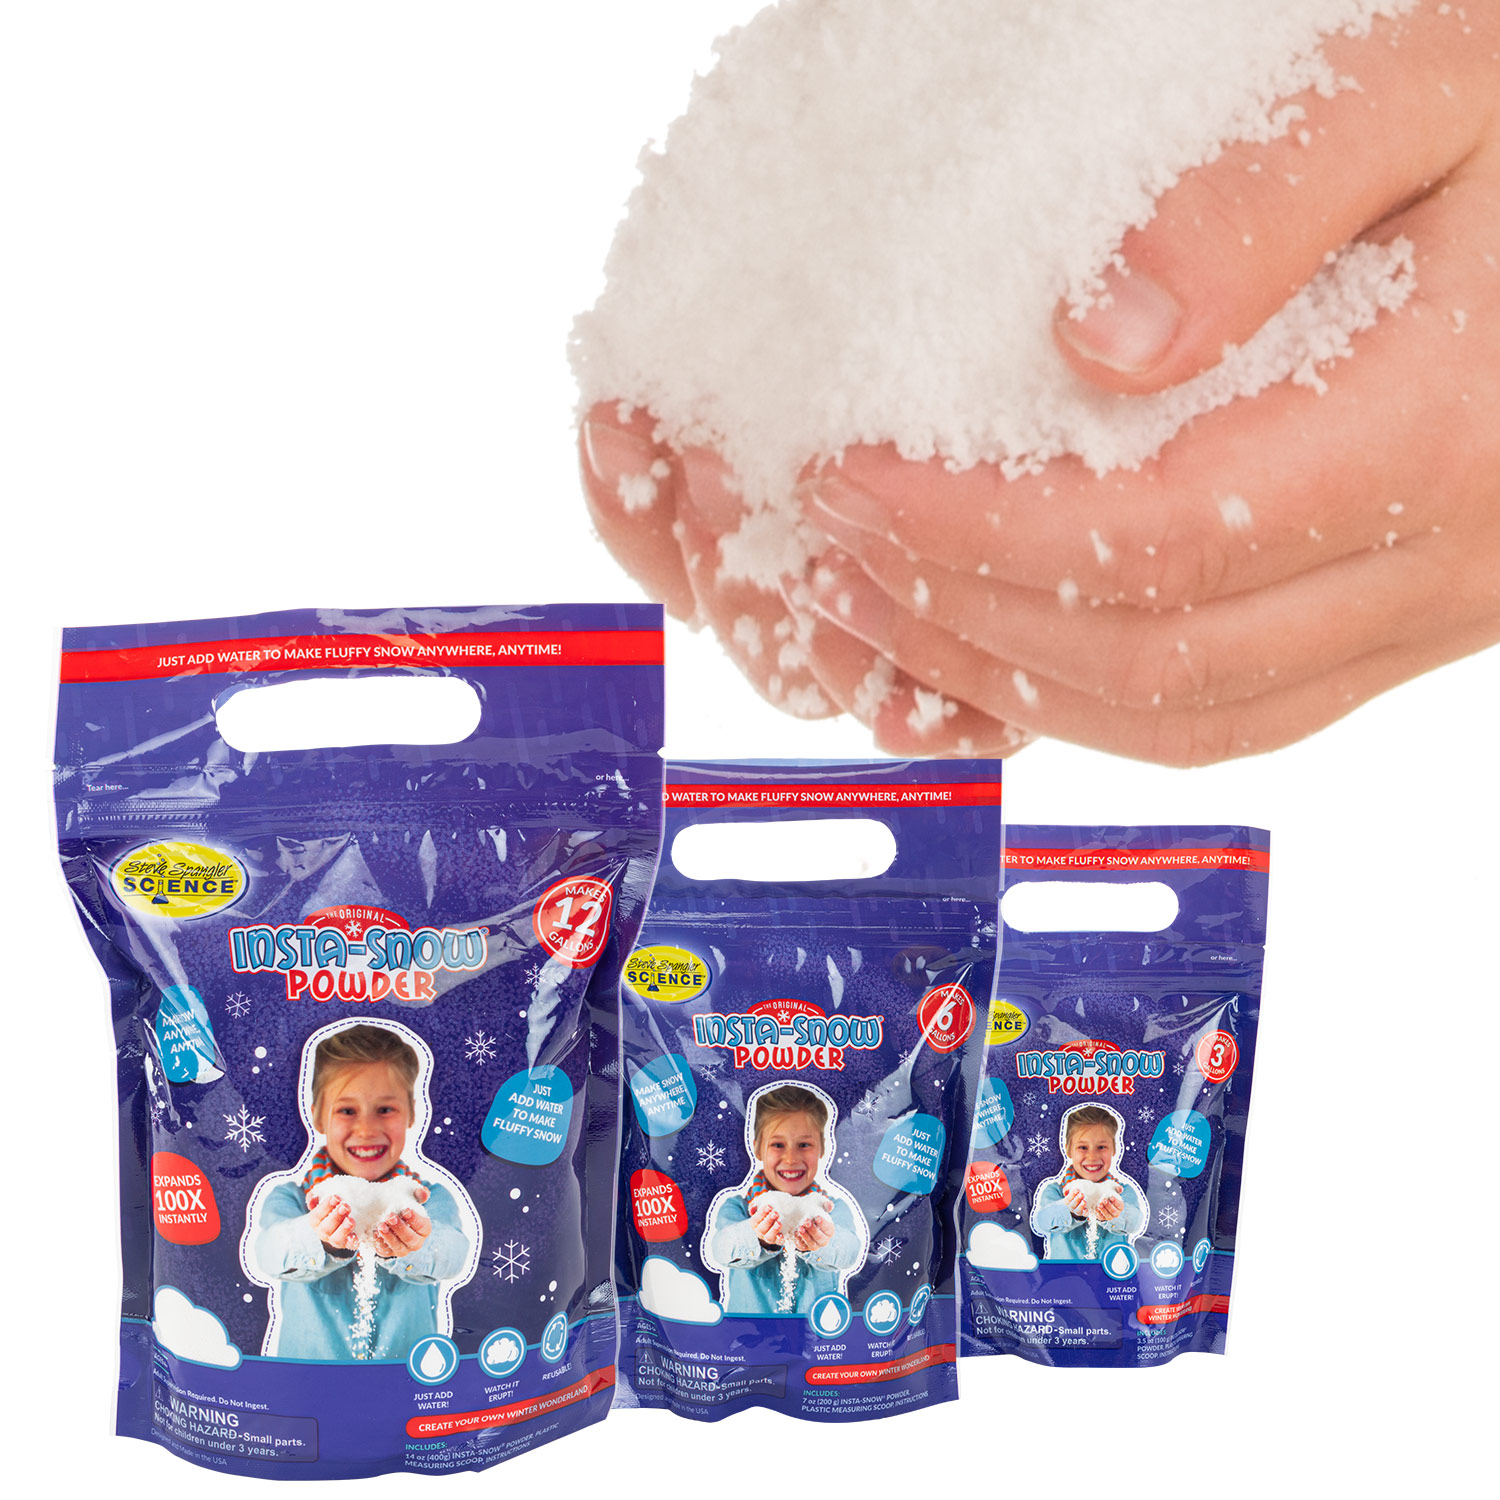 Will Make About 80 Cups of Fluffy Instantly Snow Instant Snow Powder 20 Packs 